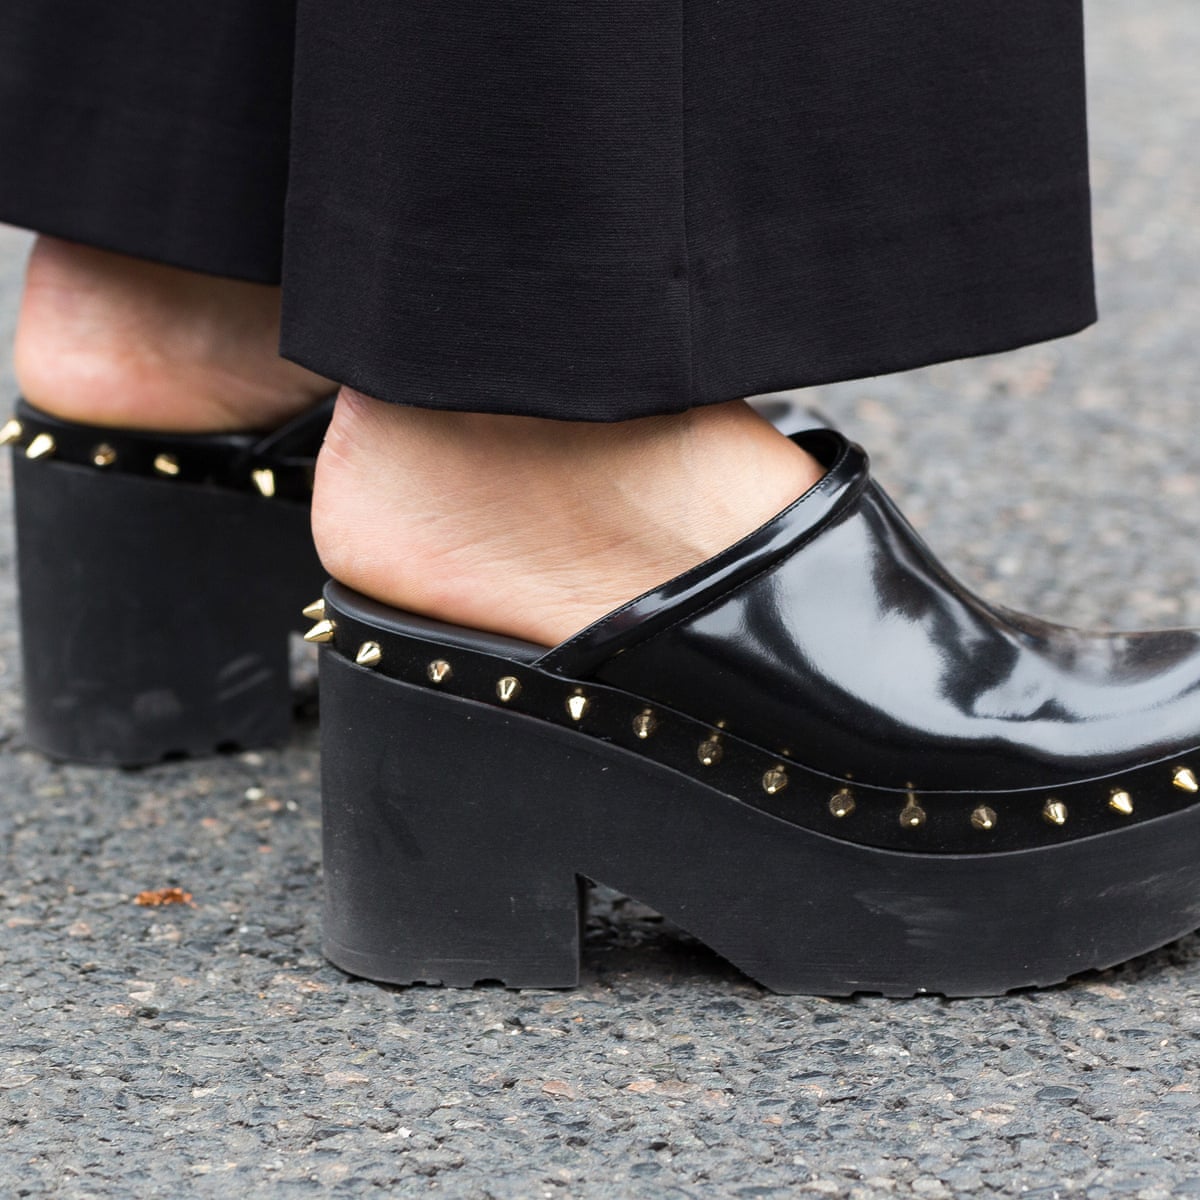 Clogs are shoes for uncertain times: the rise of footwear's 'ugly' sister, Fashion